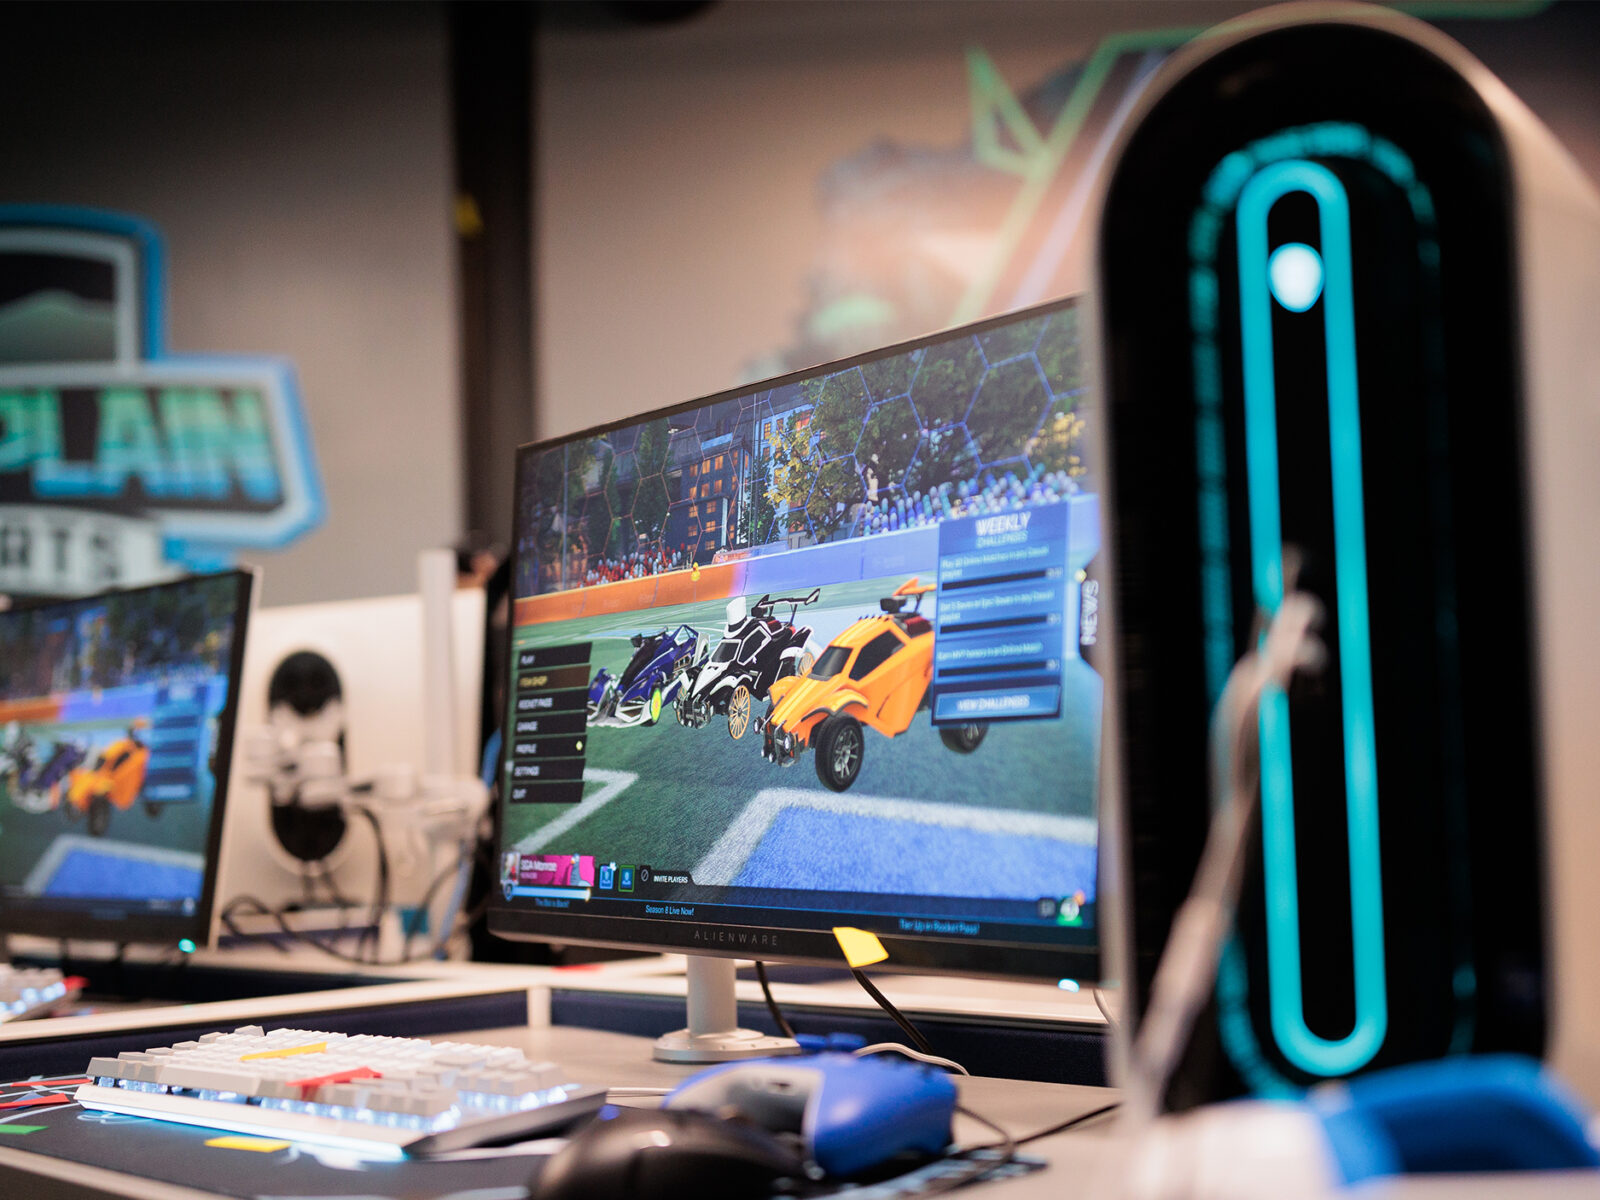 Monitor showing Rocket League in the Esports Arena